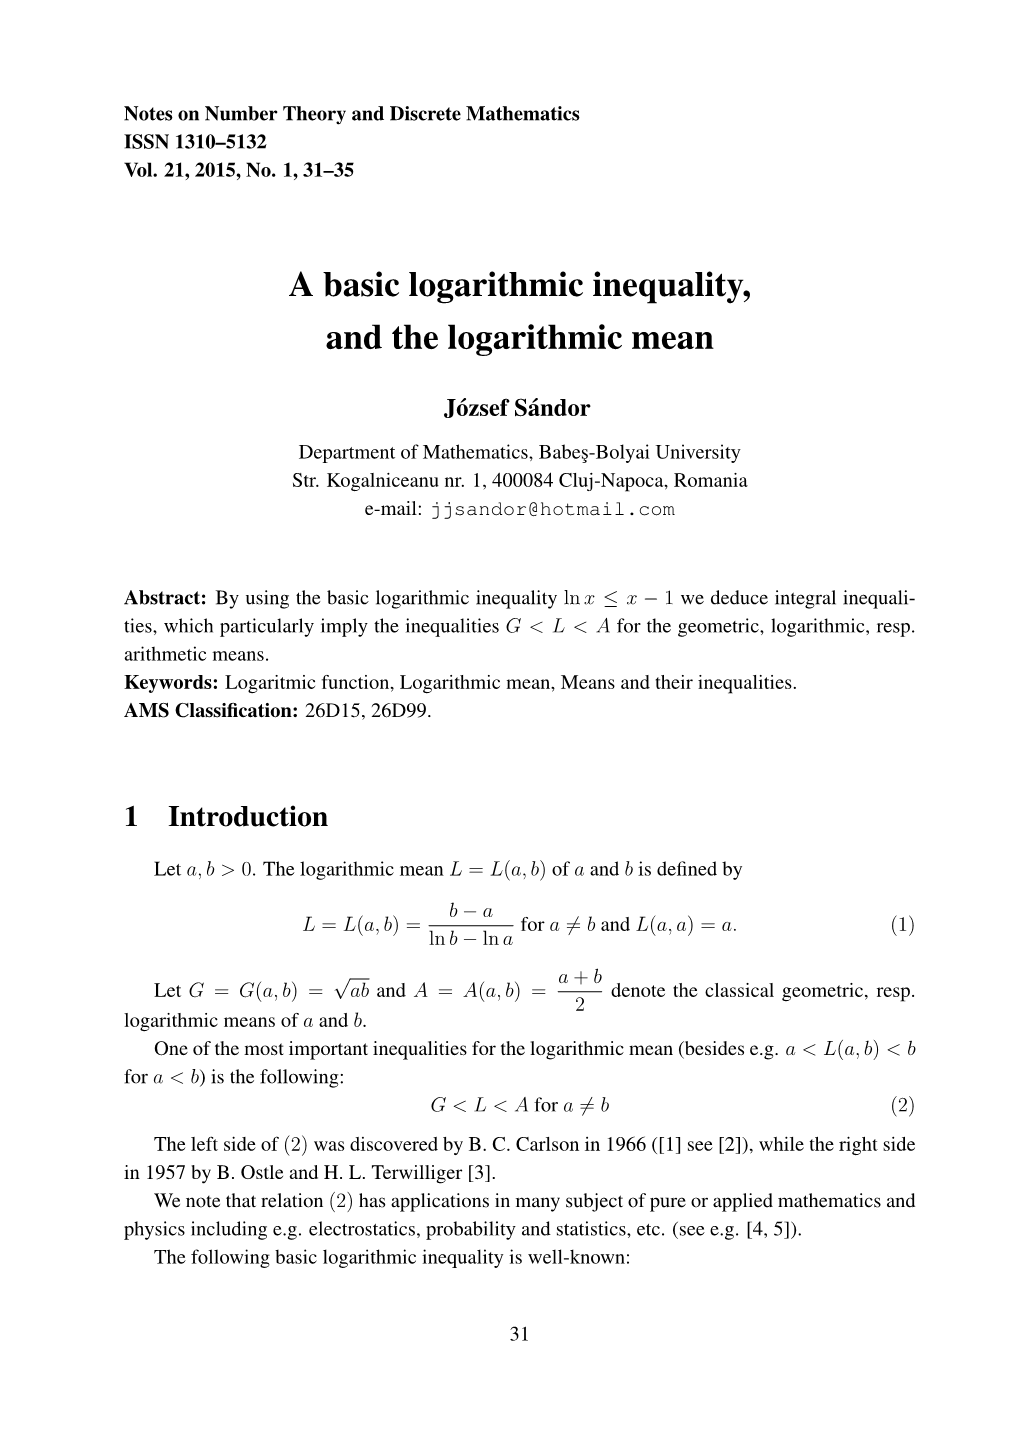 A Basic Logarithmic Inequality, and the Logarithmic Mean